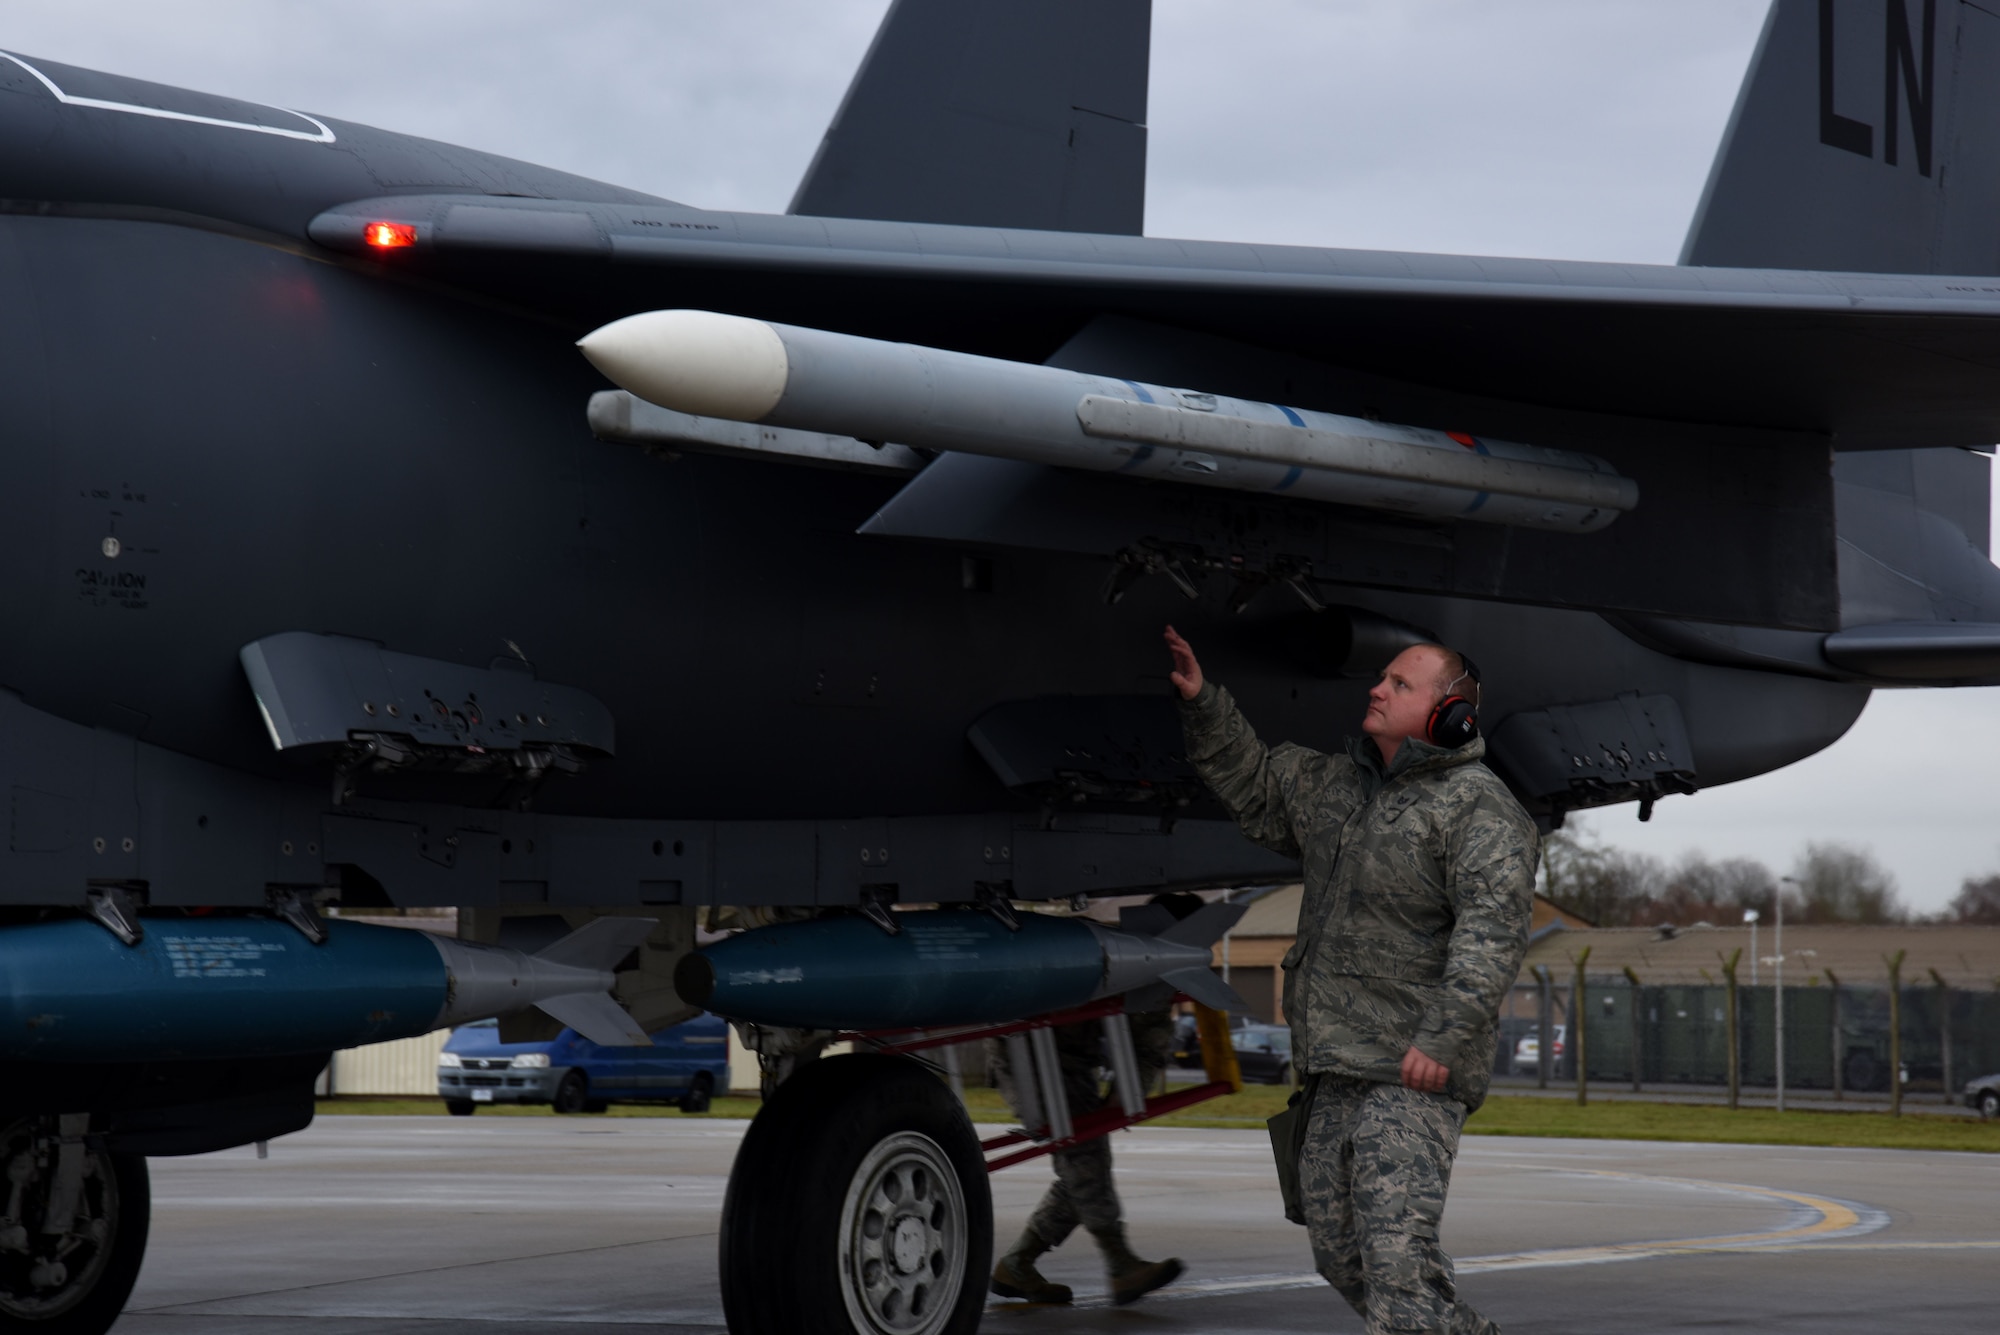 A 48th Aircraft Maintenance Squadron weapons load team chief inspects the munitions on anF-15E Strike Eagle at Royal Air Force Lakenheath, England, Dec. 13. The weapons load crew Airmen are also responsible for arming and de-arming the weapons on the aircraft. (U.S. Air Force photo/Senior Airman Abby L. Finkel)